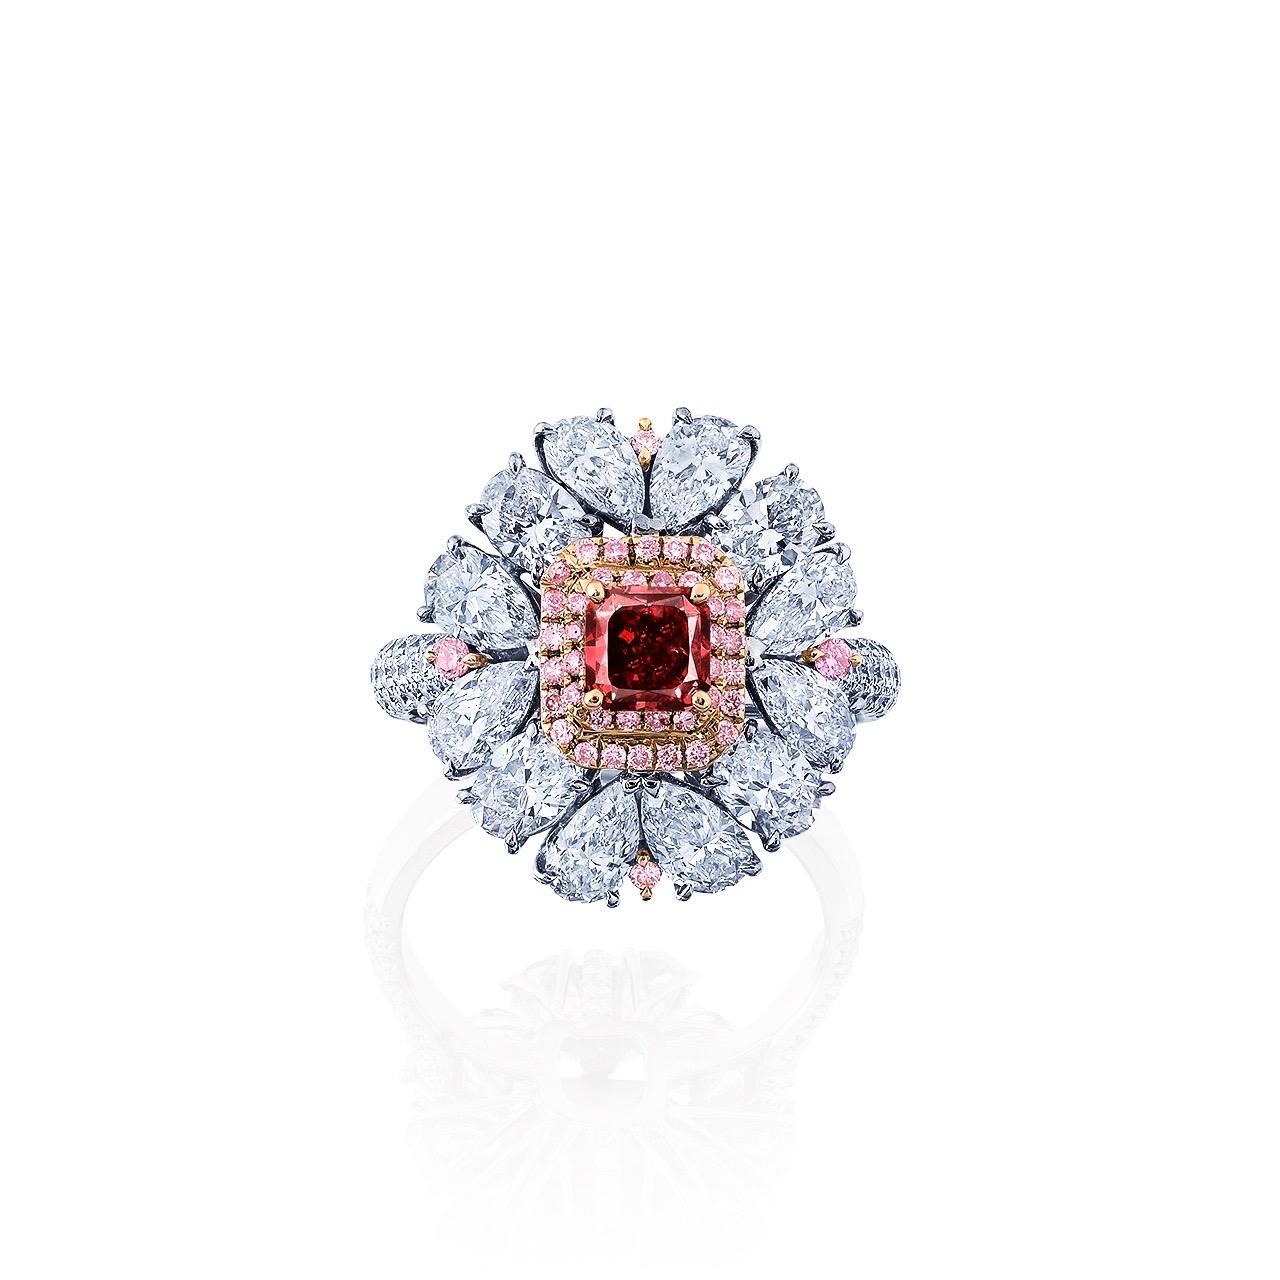 Radiant Cut Emilio Jewelry Gia Certified Fancy Red Diamond Ring  For Sale